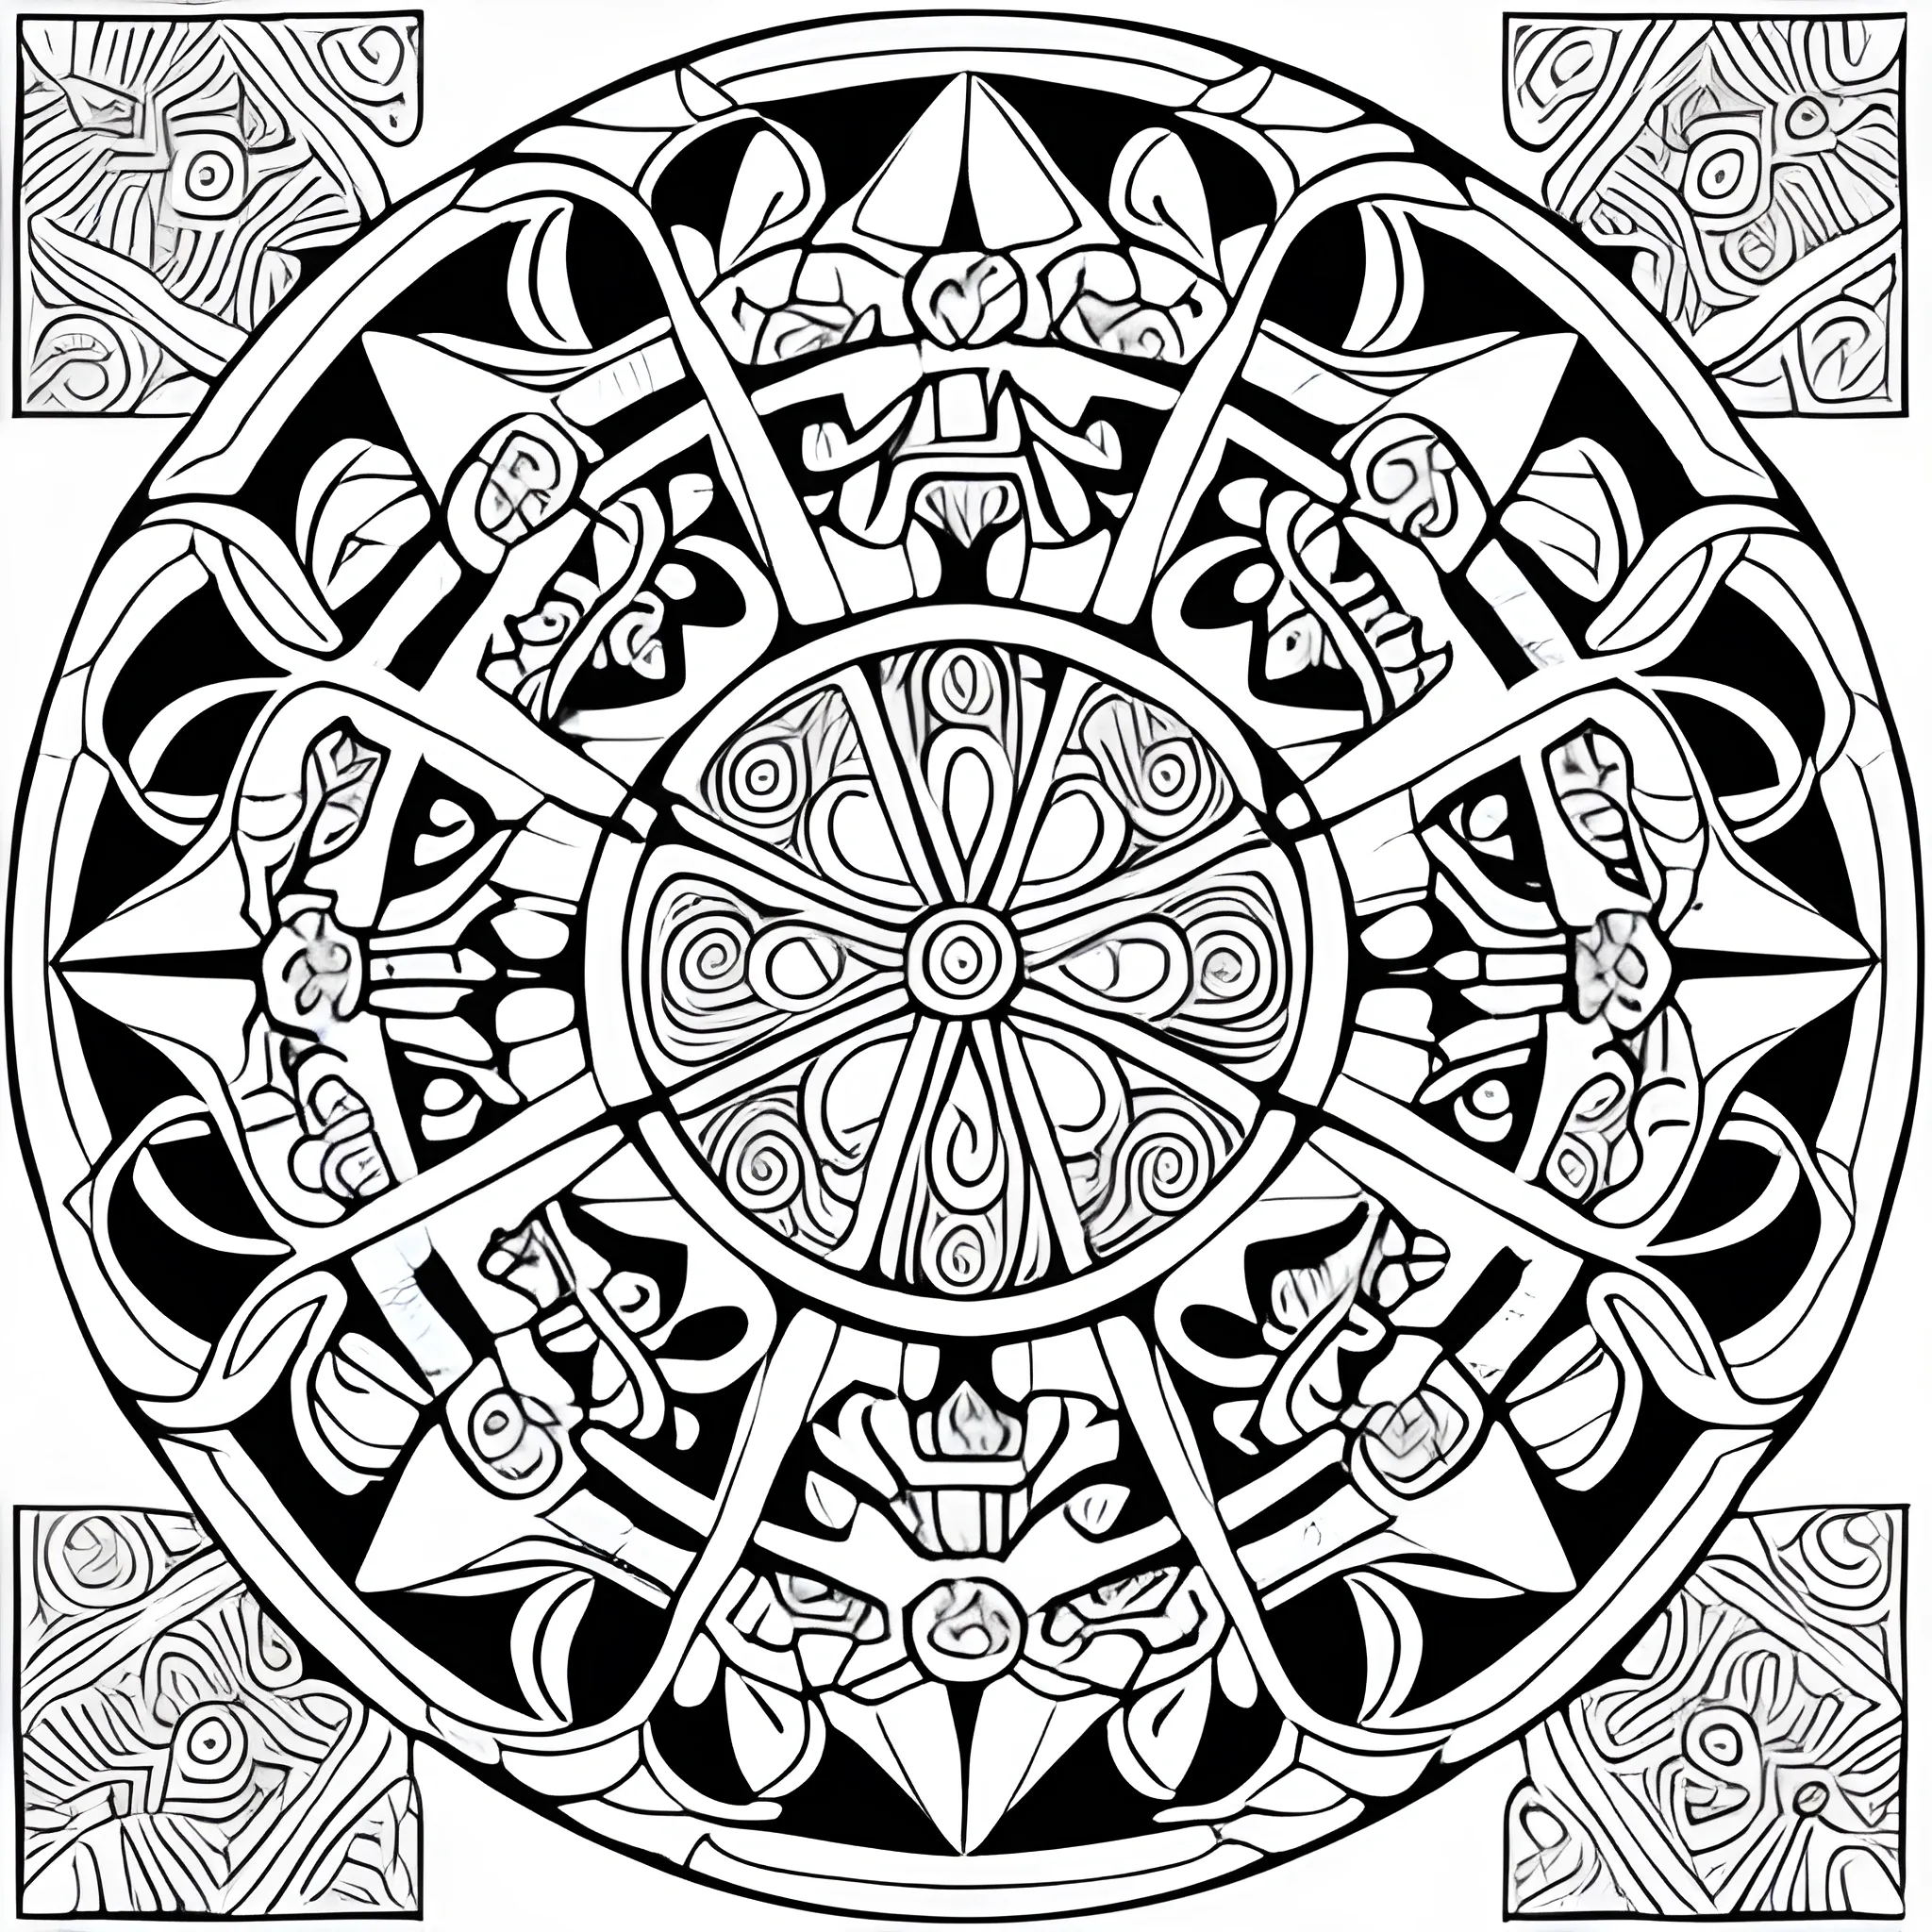 coloring book page detailed mandal maori, inside a floral circle, white background, stencil bold lines, inspired in the ancient culture